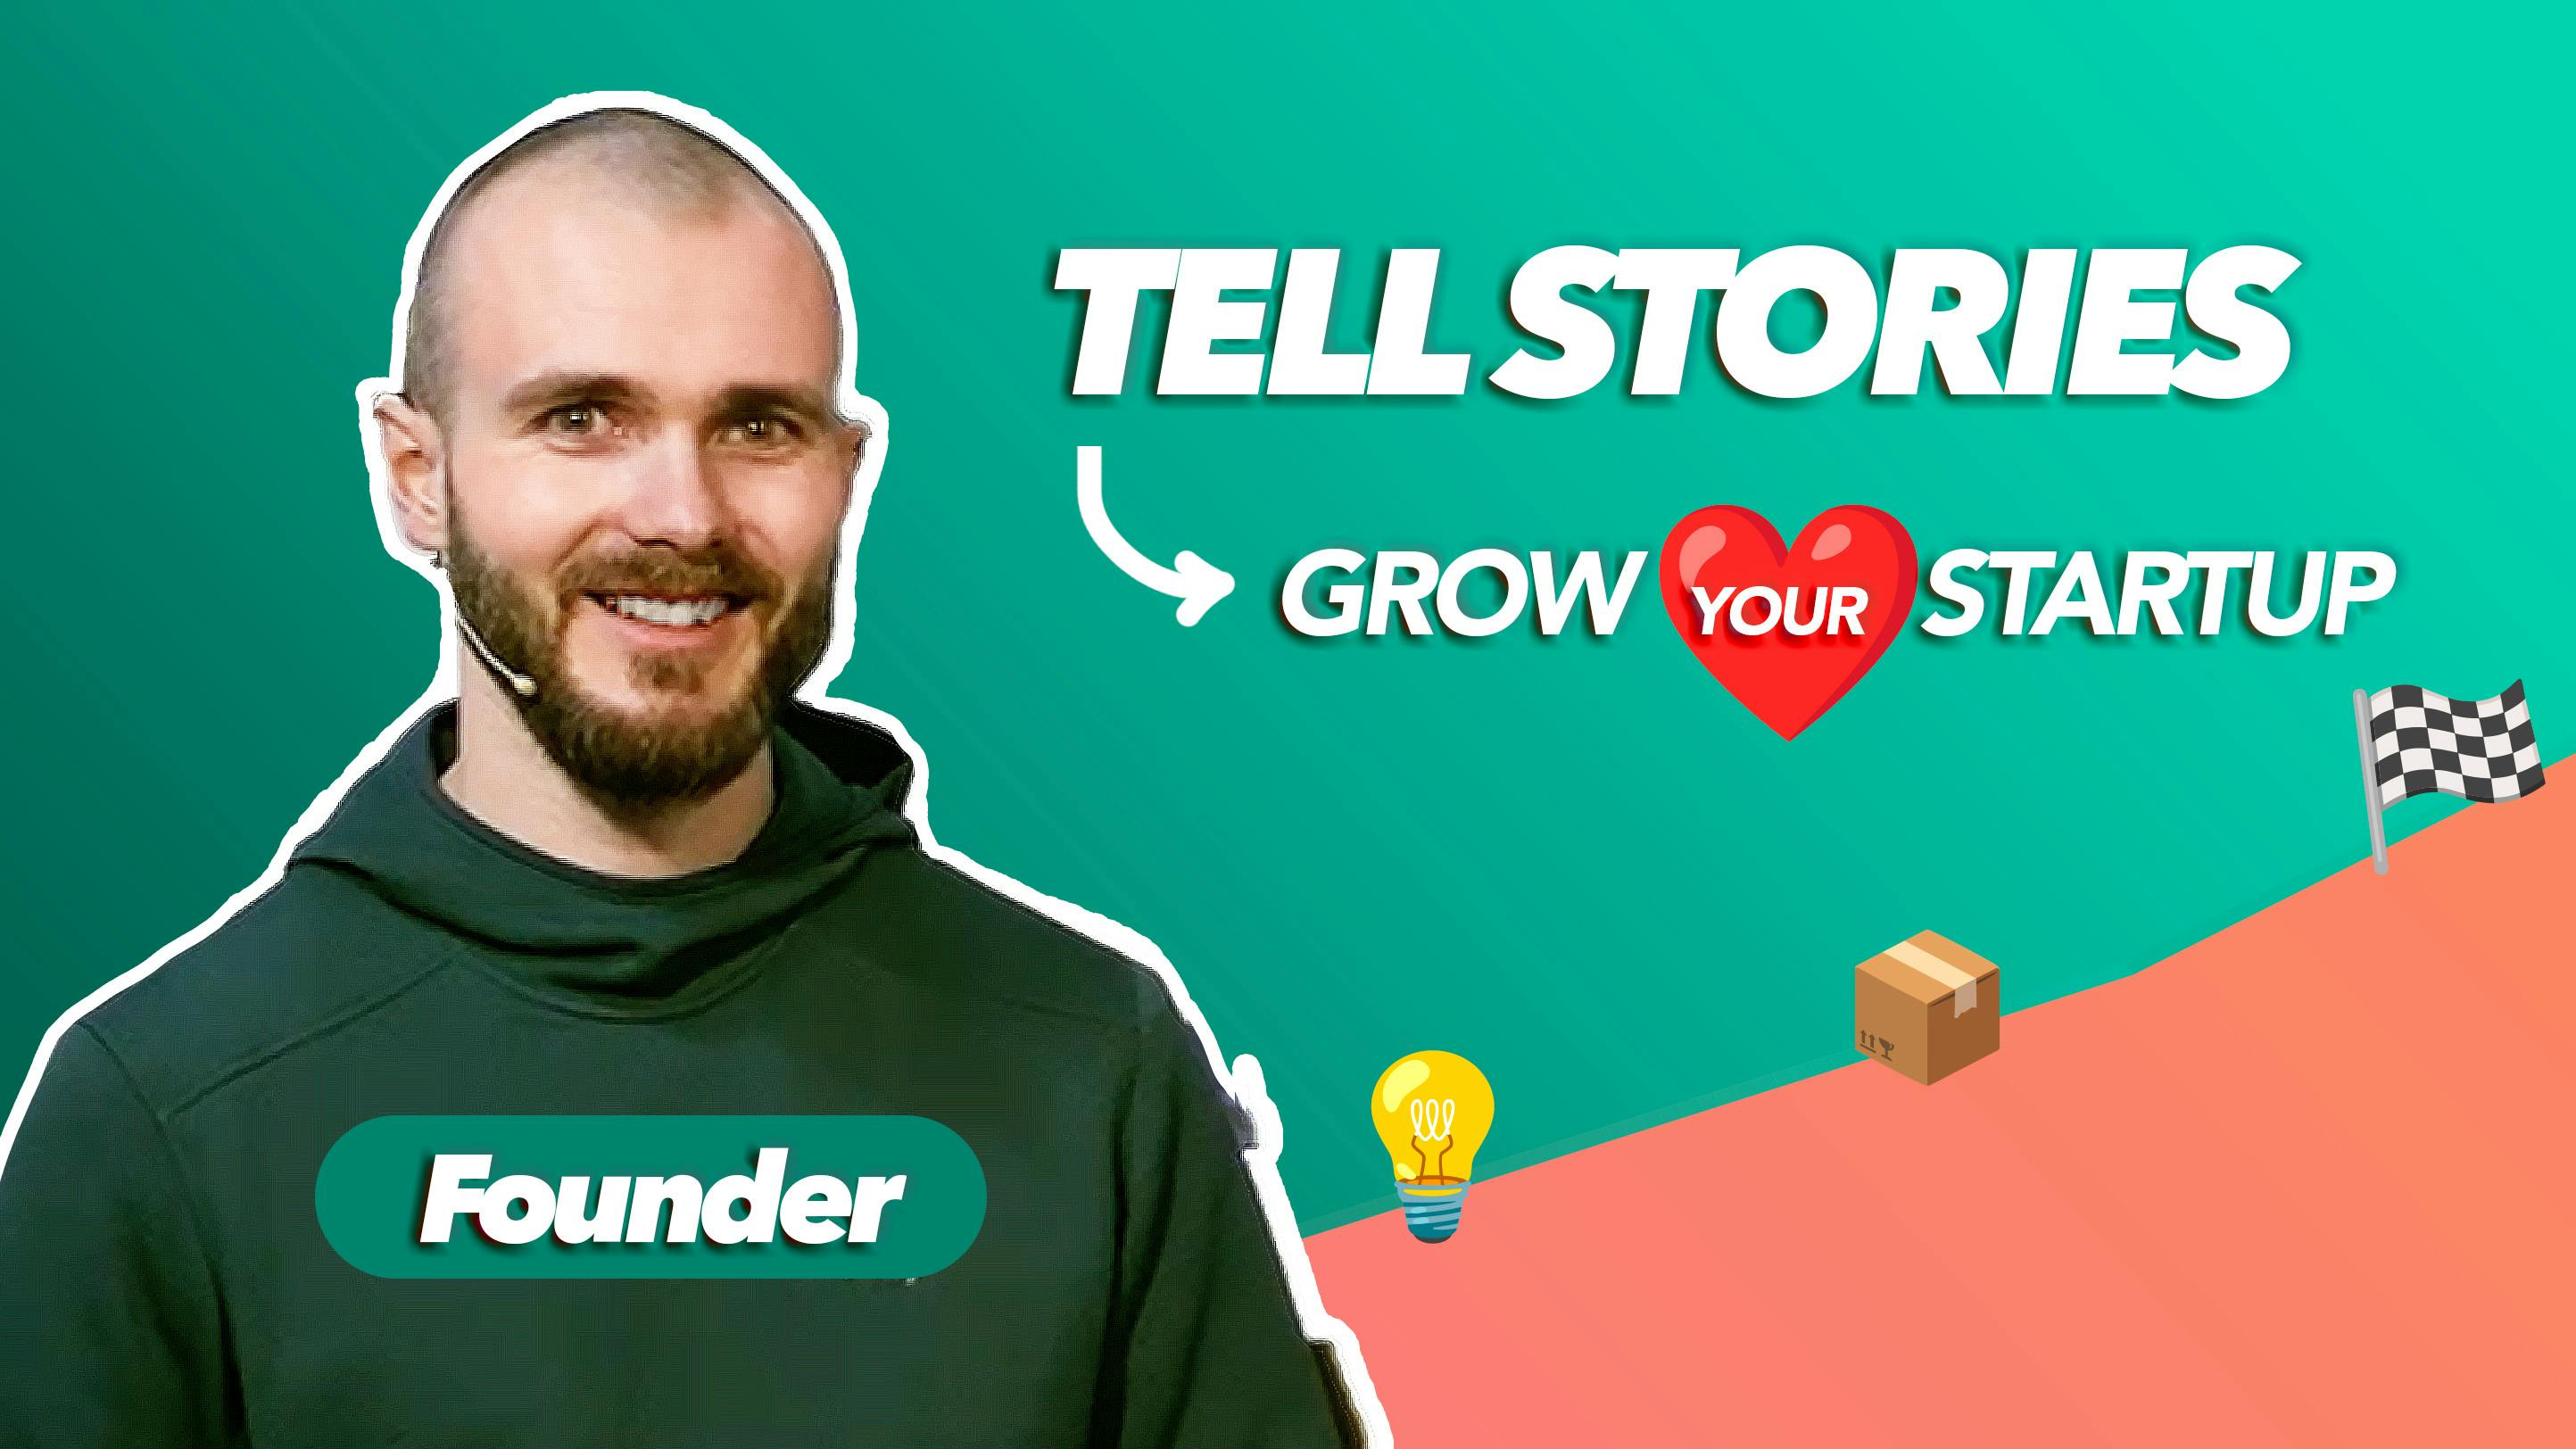 Storytelling as startup GTM - Build your founder story (examples)